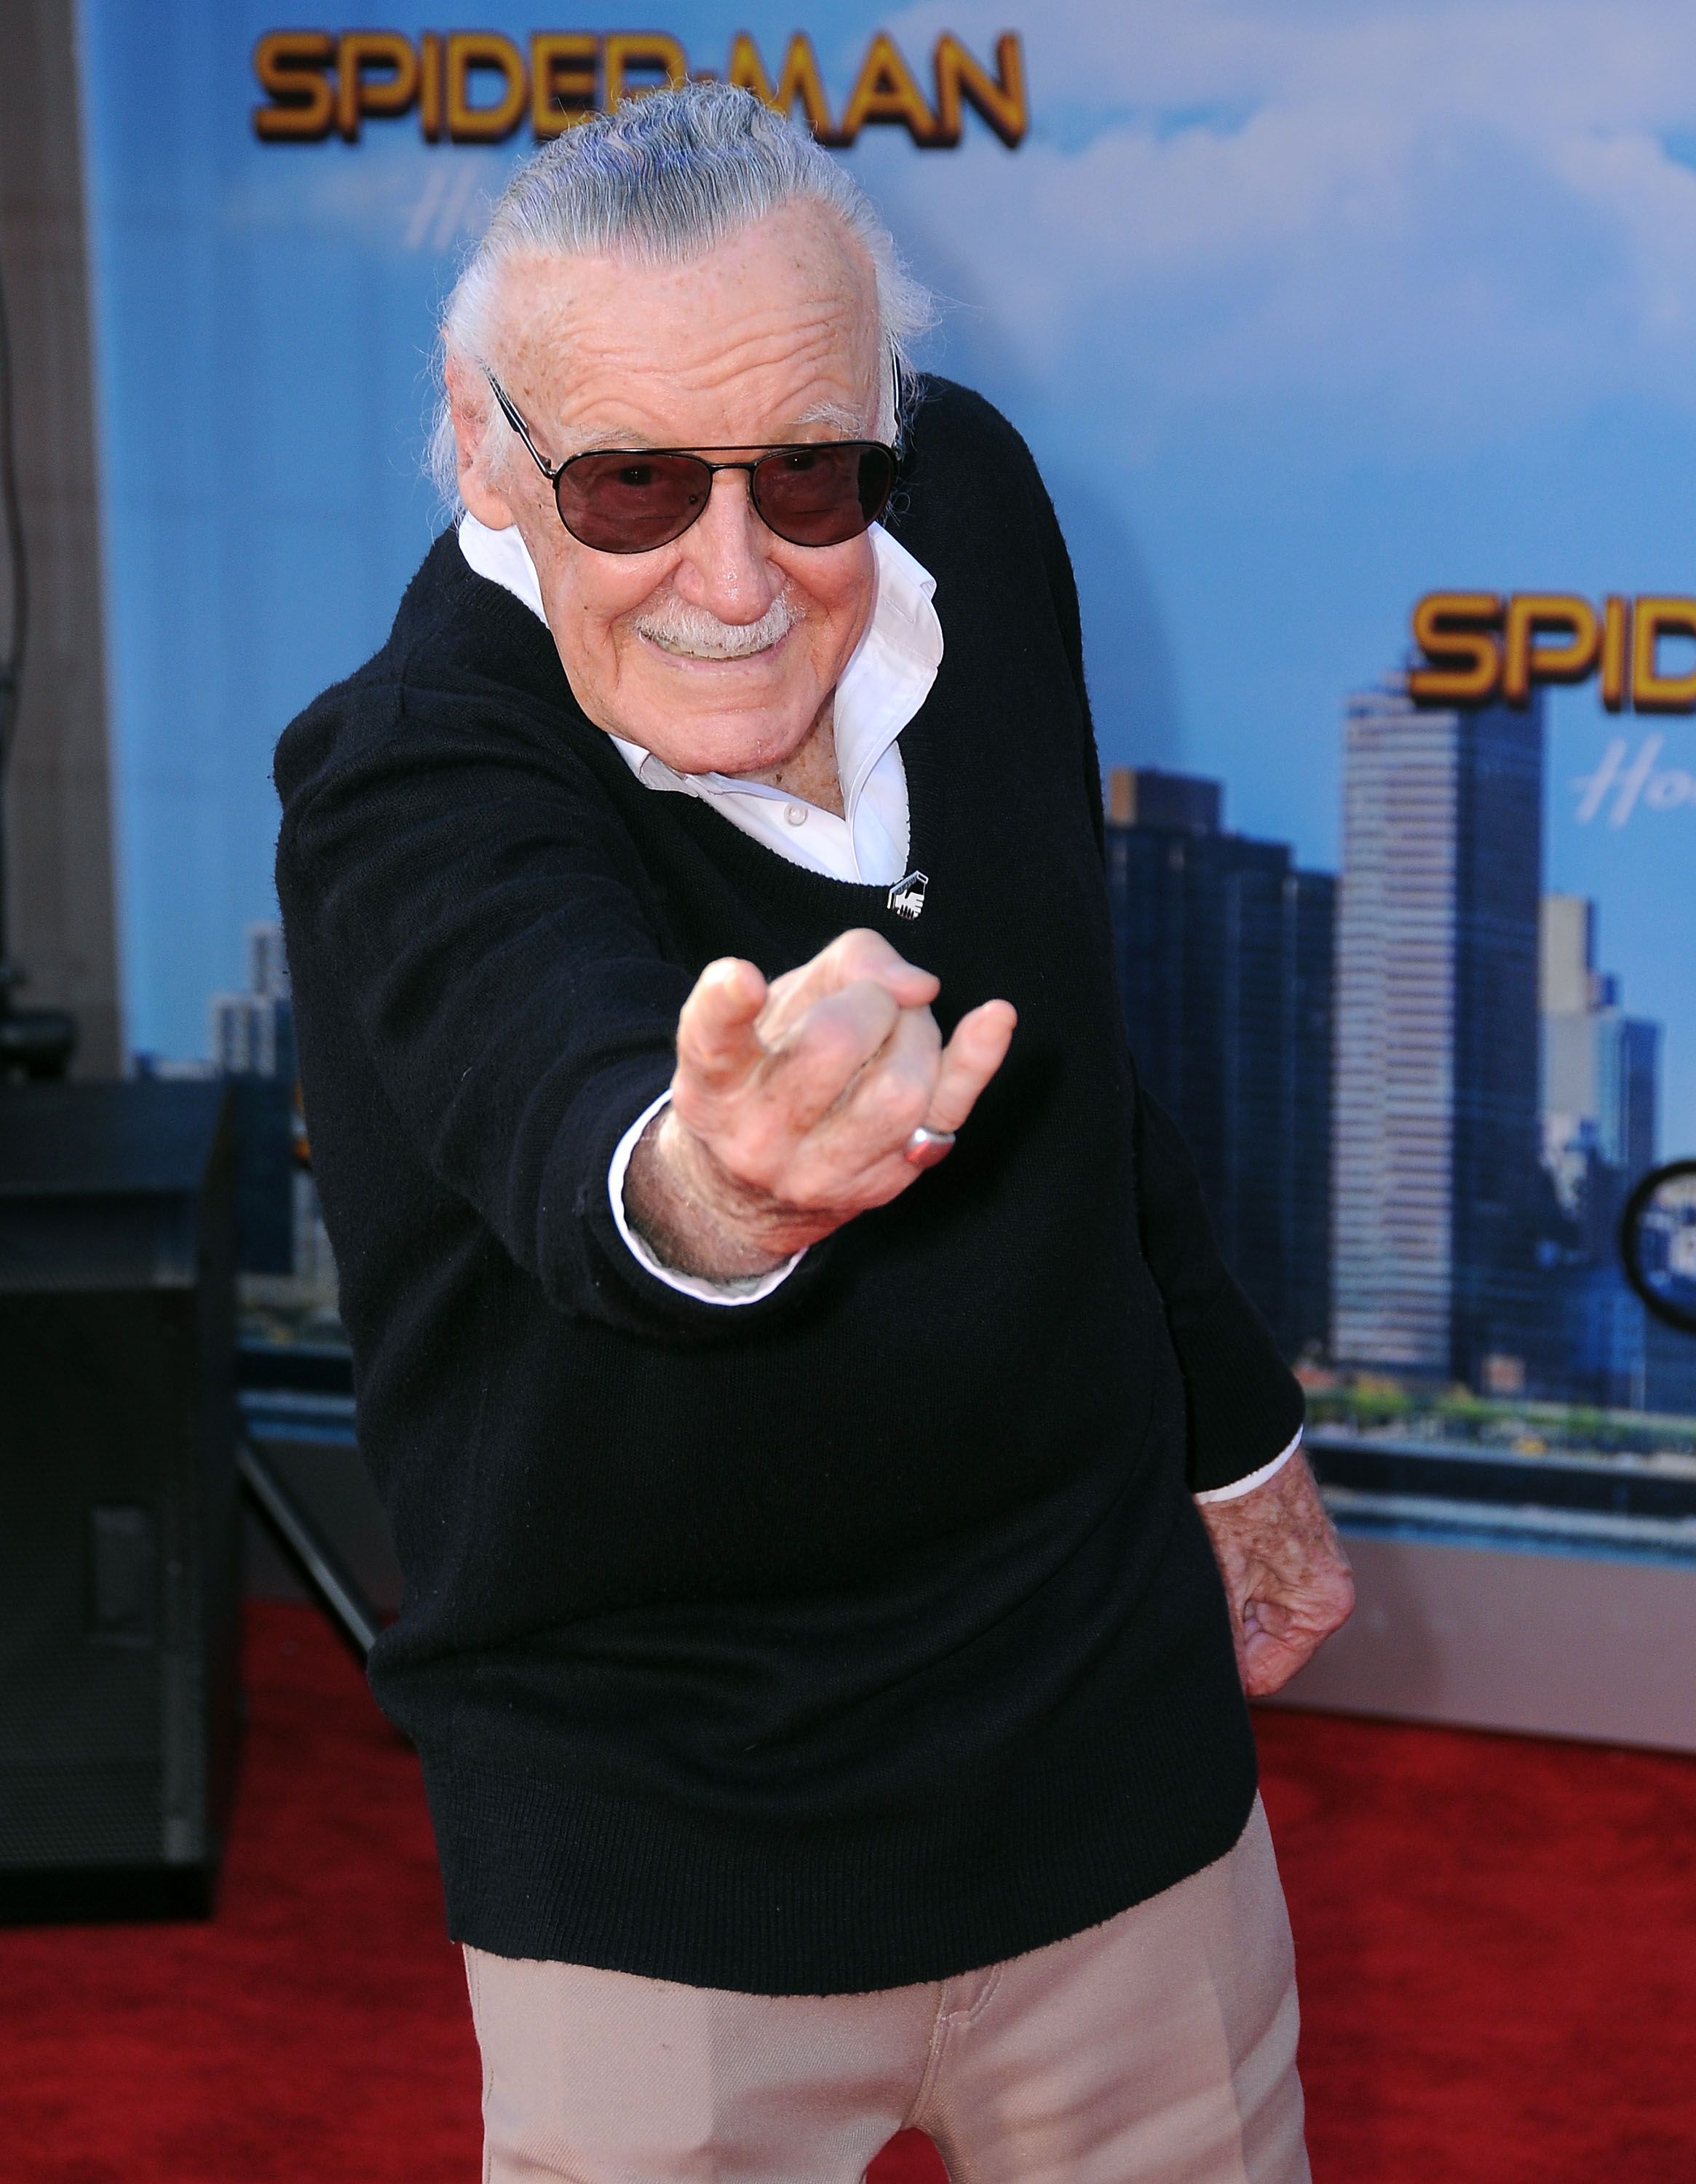 Stan Lee at the premiere of "Spider-Man: Homecoming" at TCL Chinese Theatre on June 28, 2017 | Photo: Getty Images